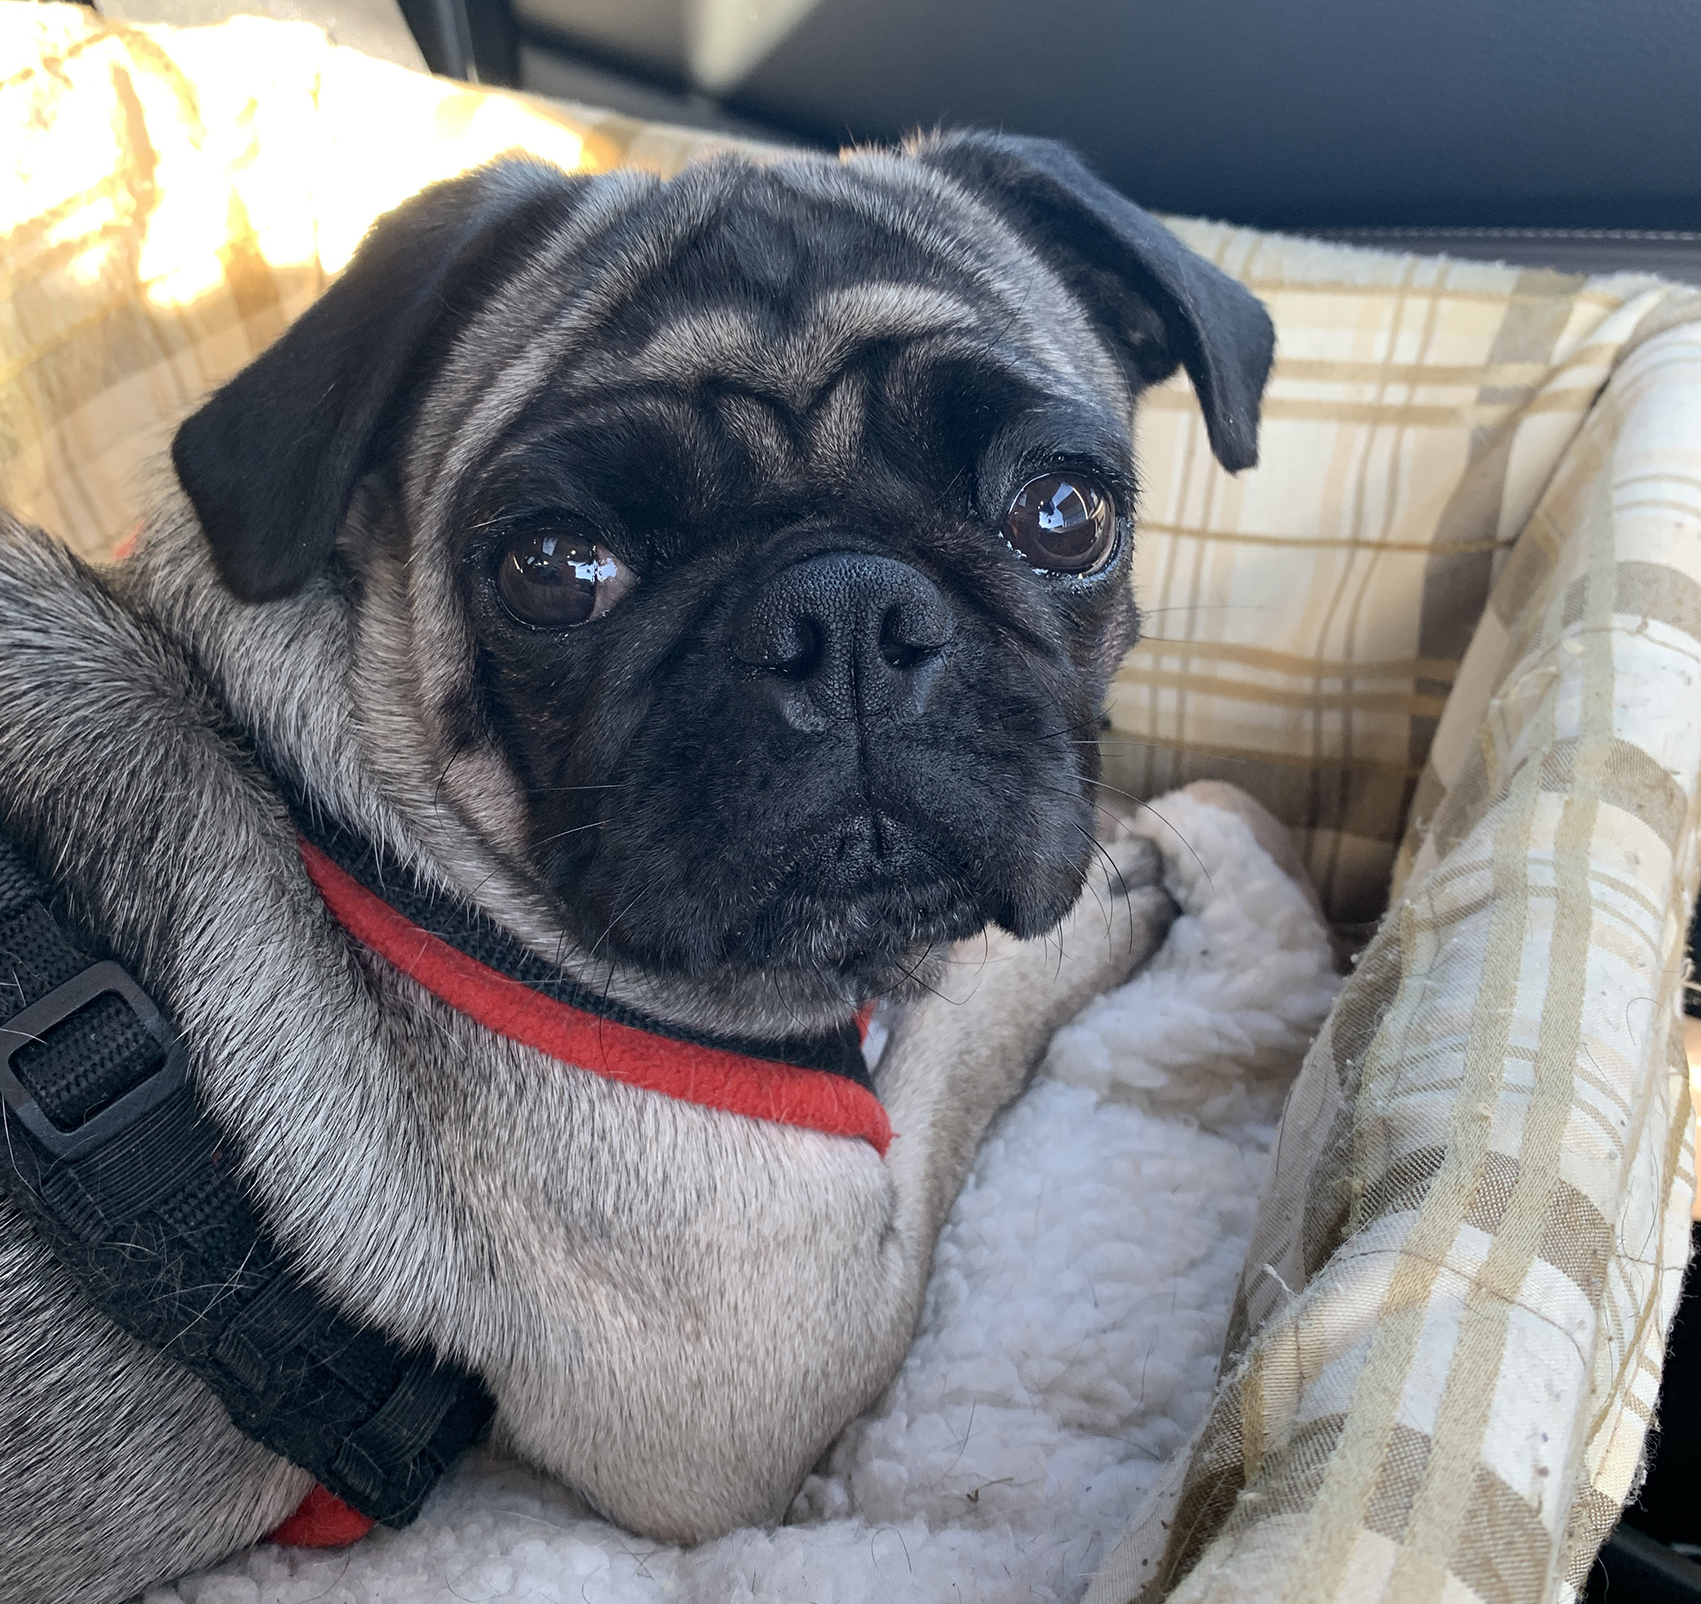 Susie the pug - image Wilma on https://pugprotectiontrust.org